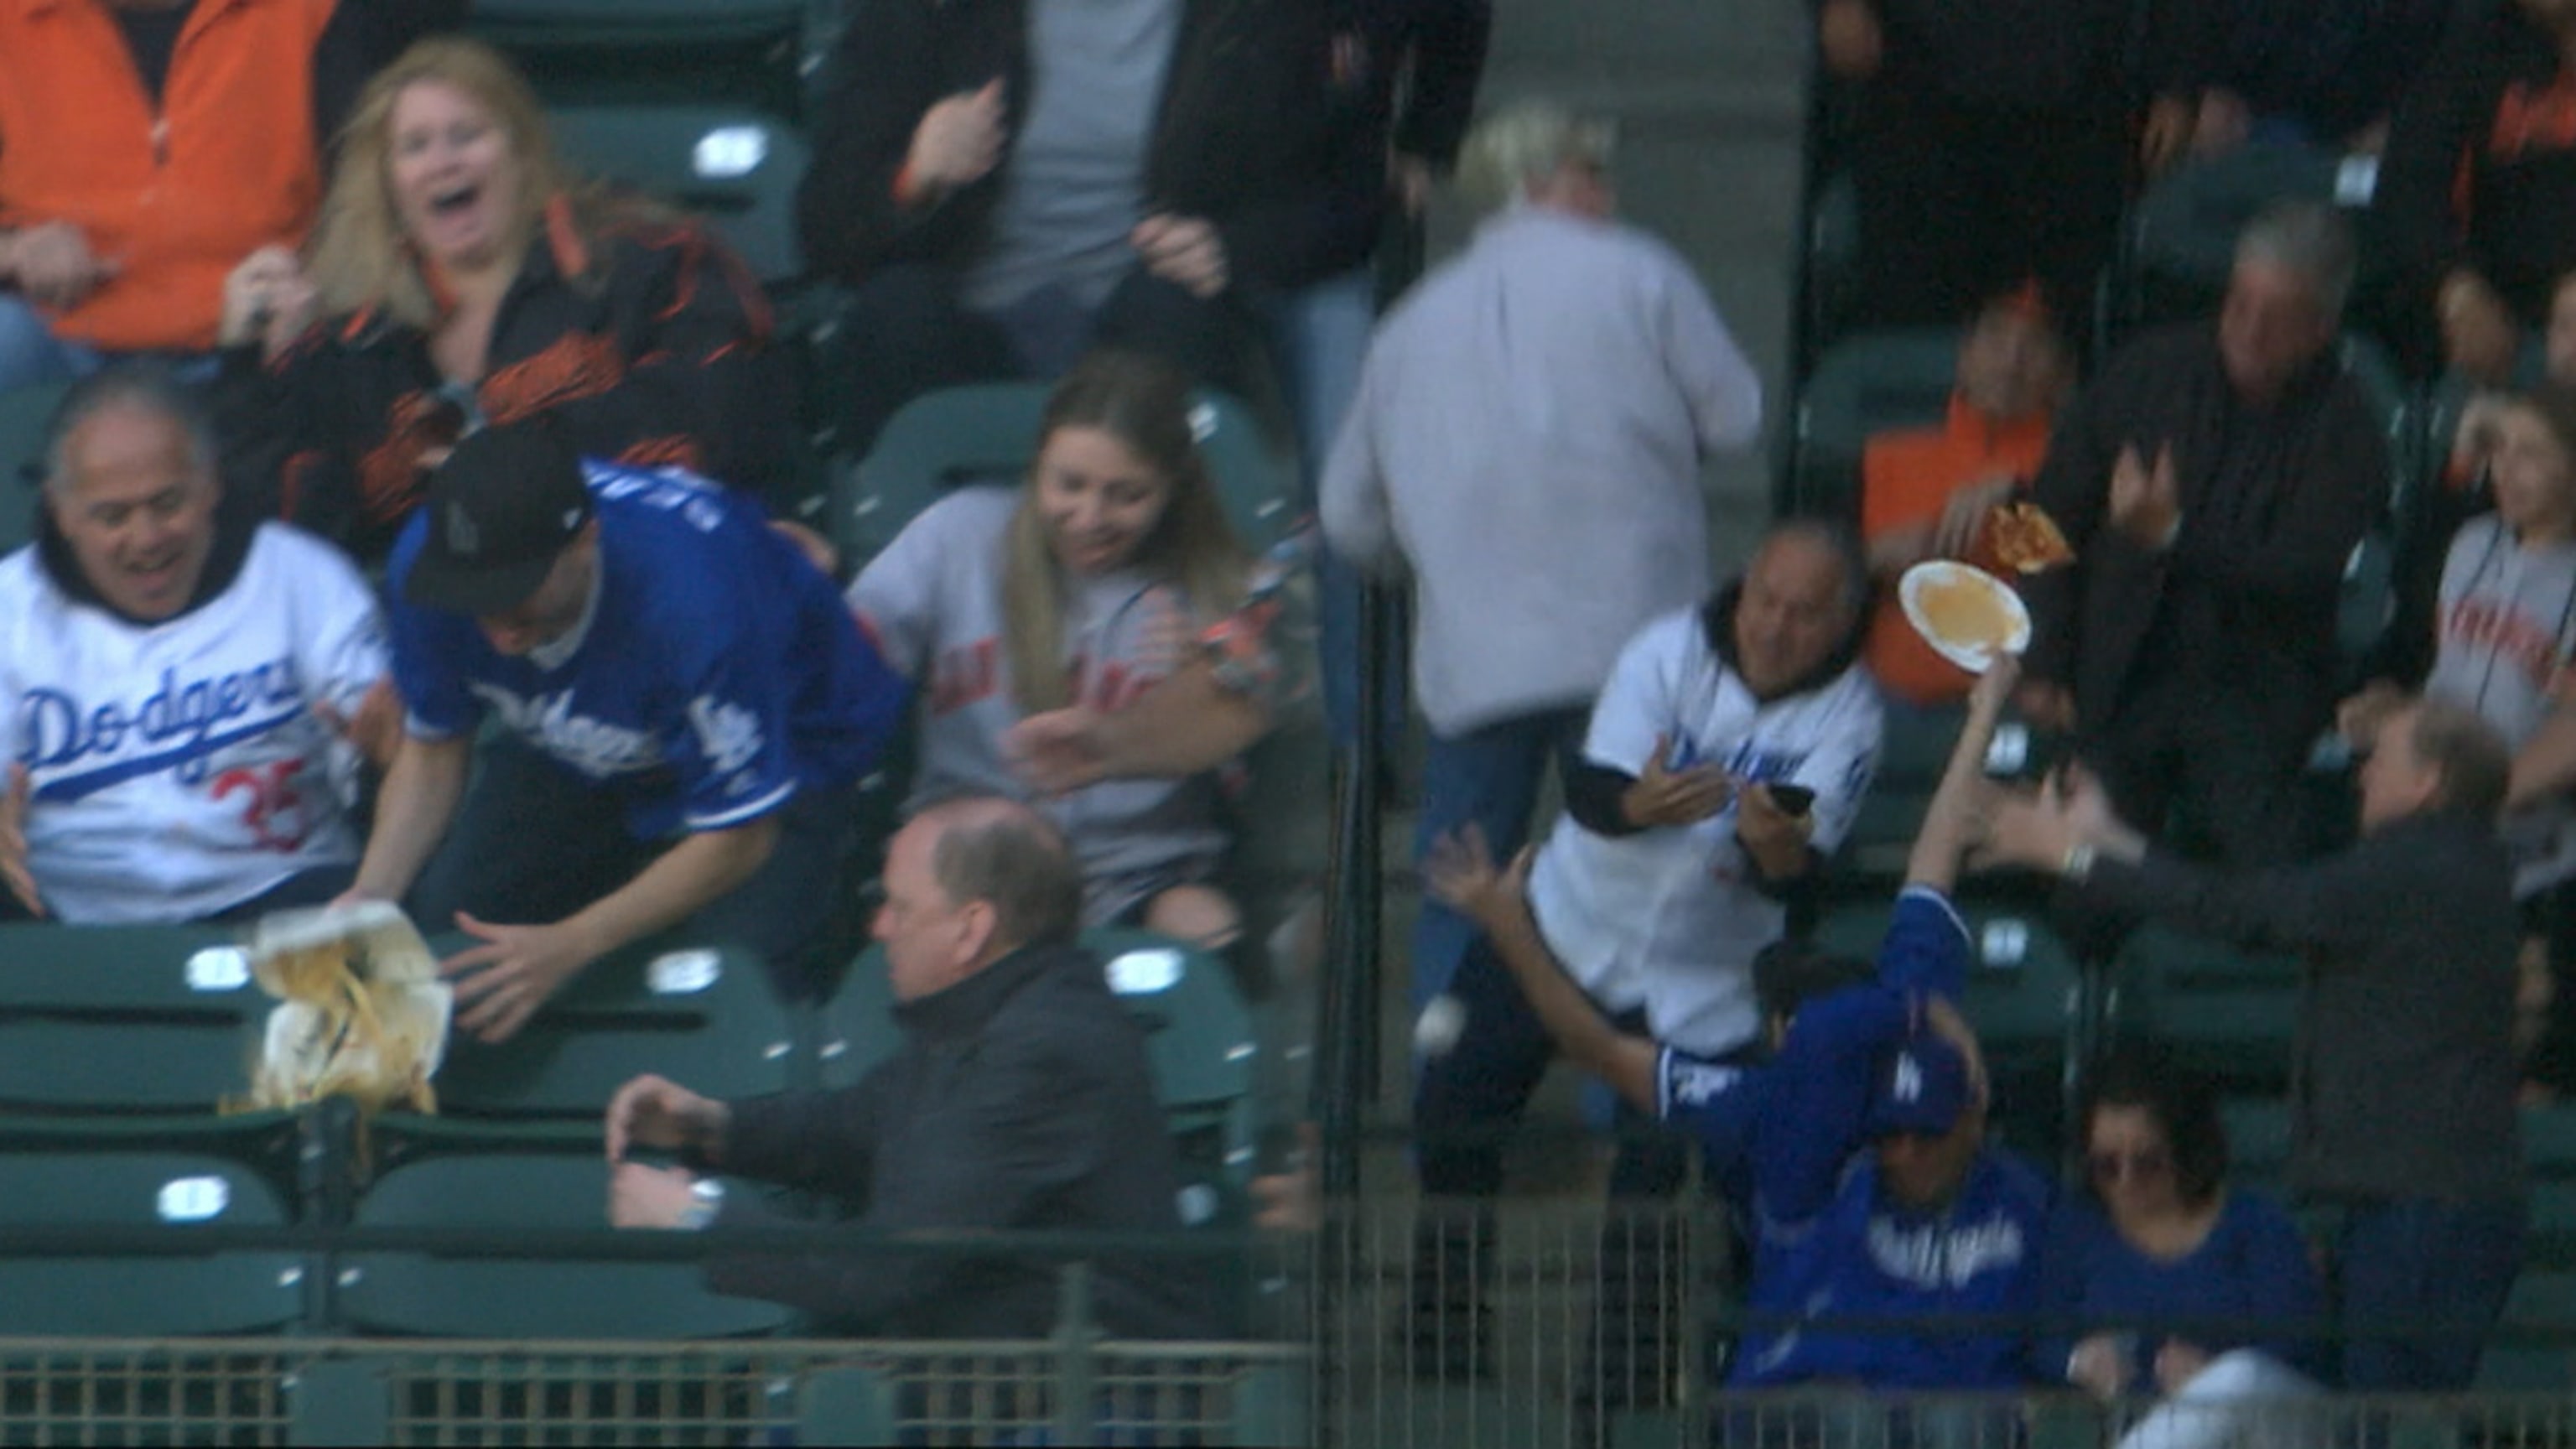 Dodgers fan catches foul ball at Sunday's baseball game while juggling baby  and a beer, viral video shows - ABC7 Los Angeles